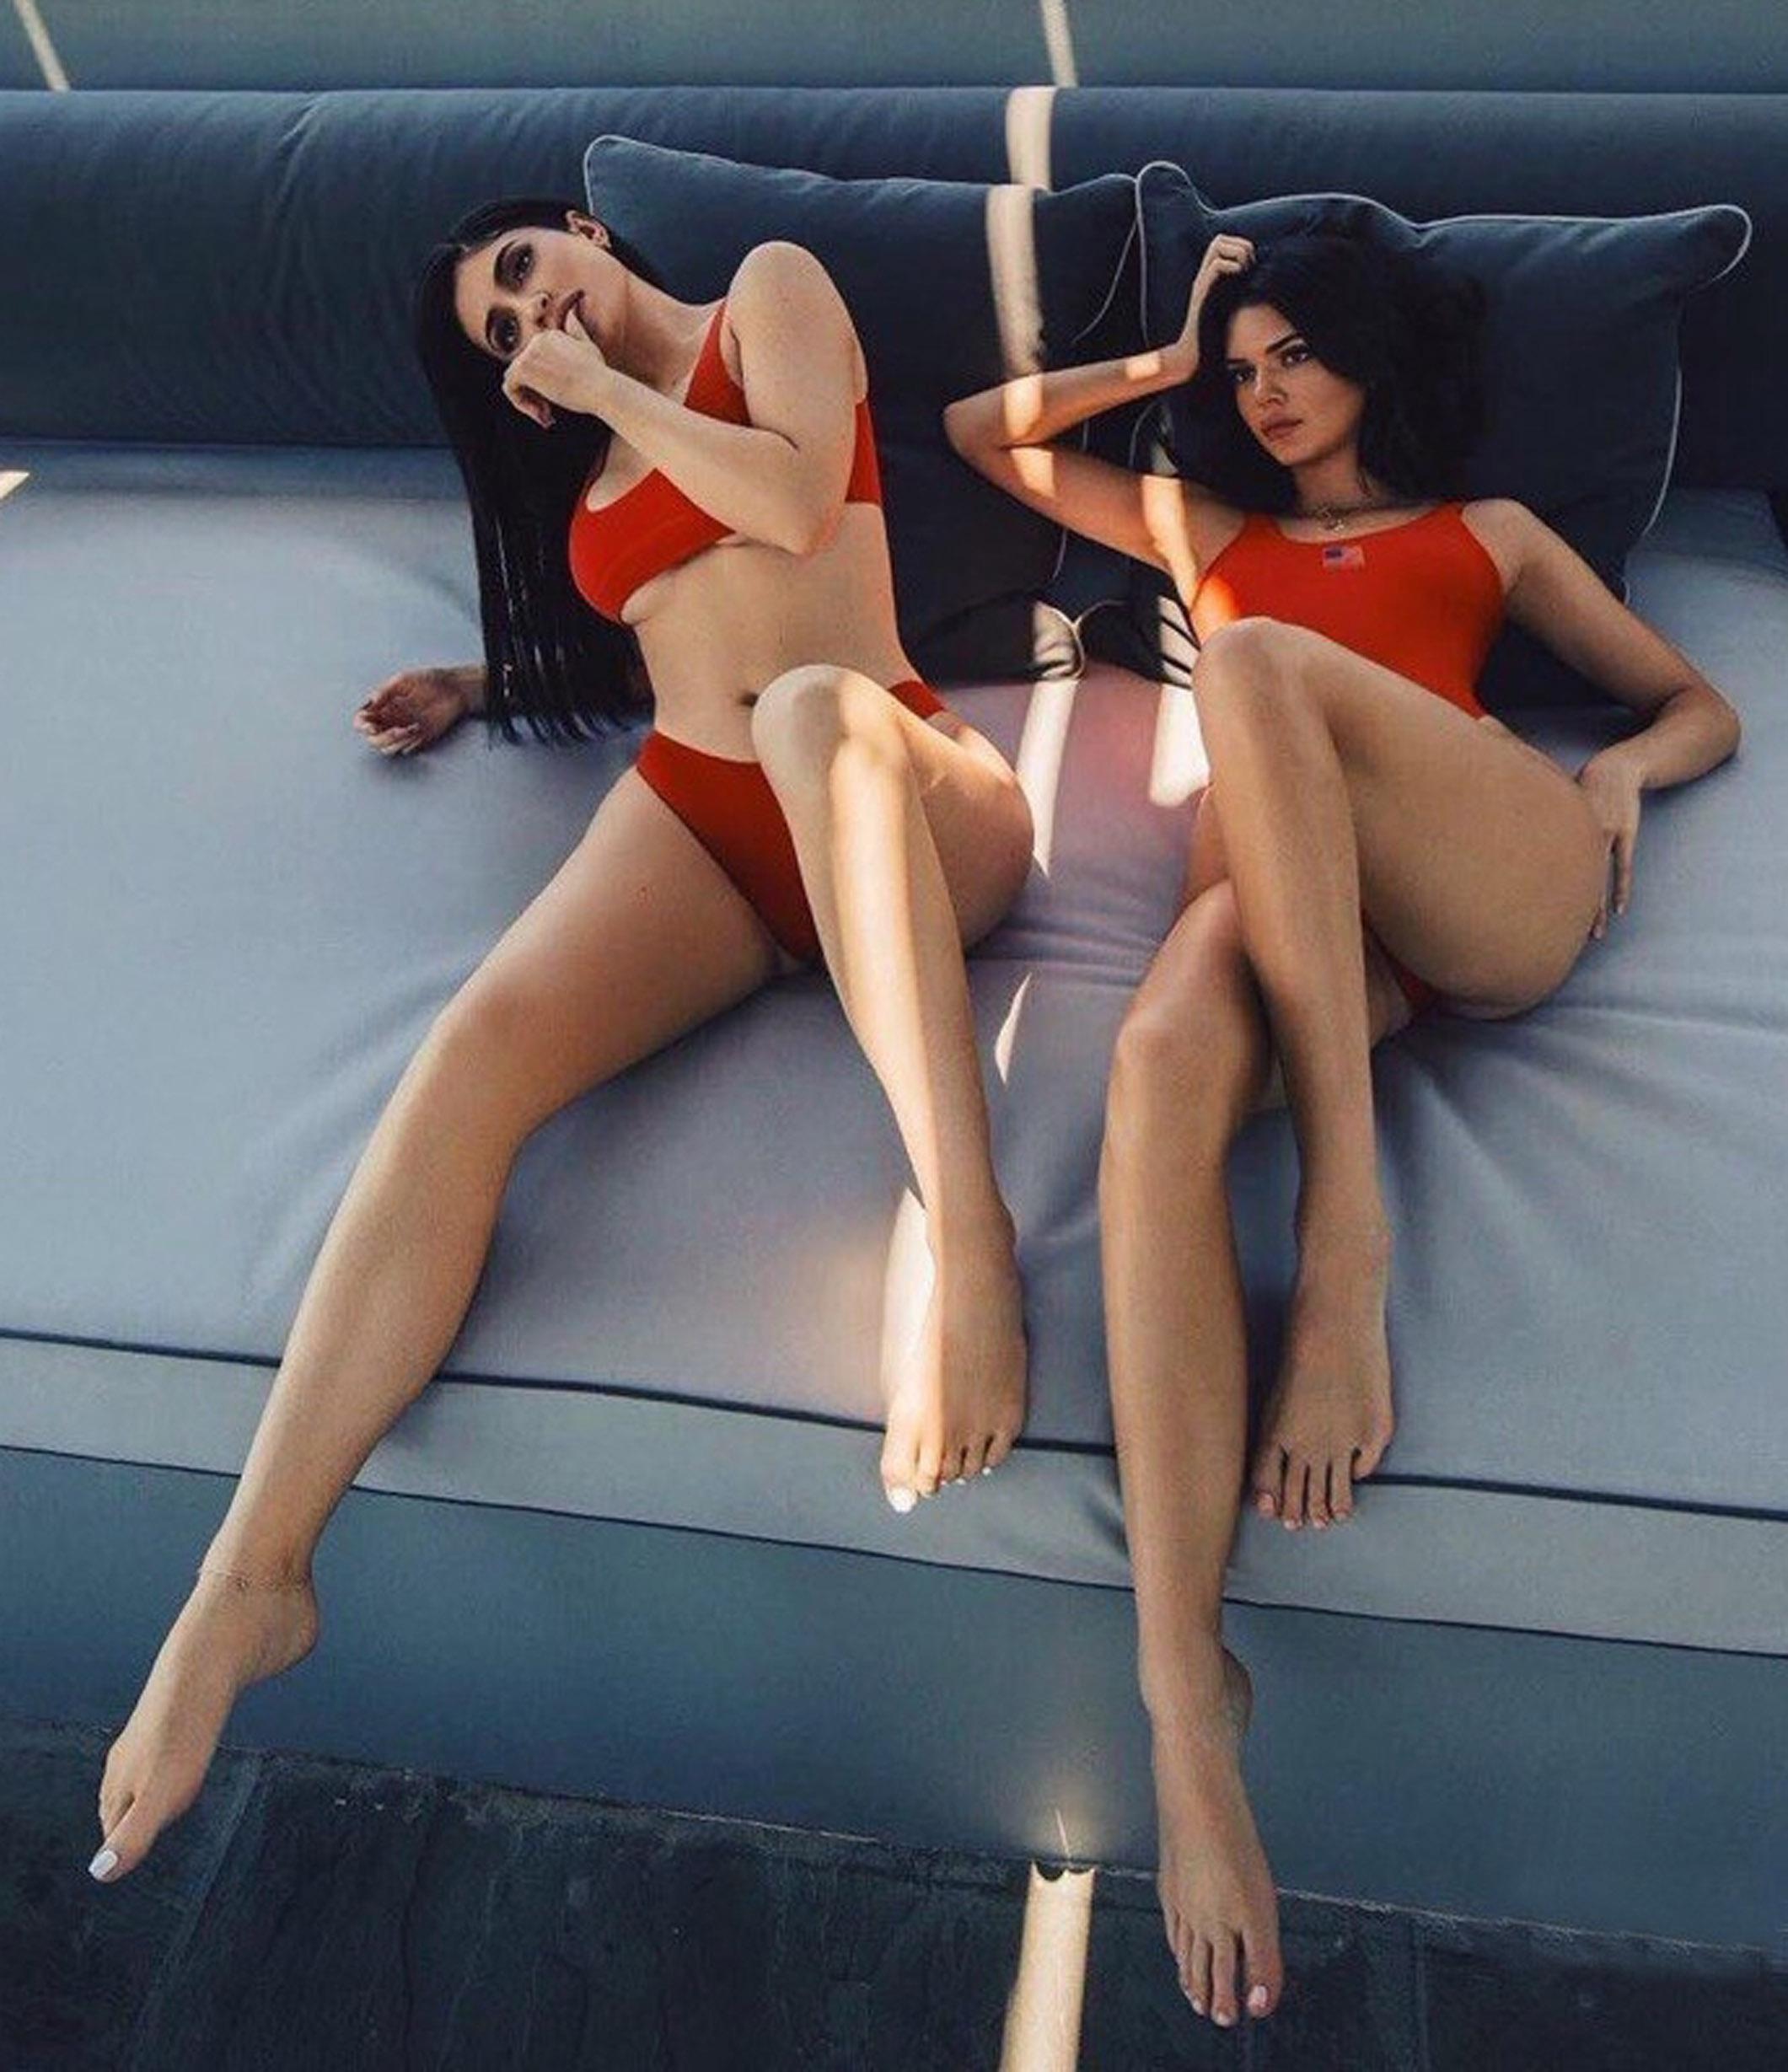 chris heth add kylie and kendall naked photo